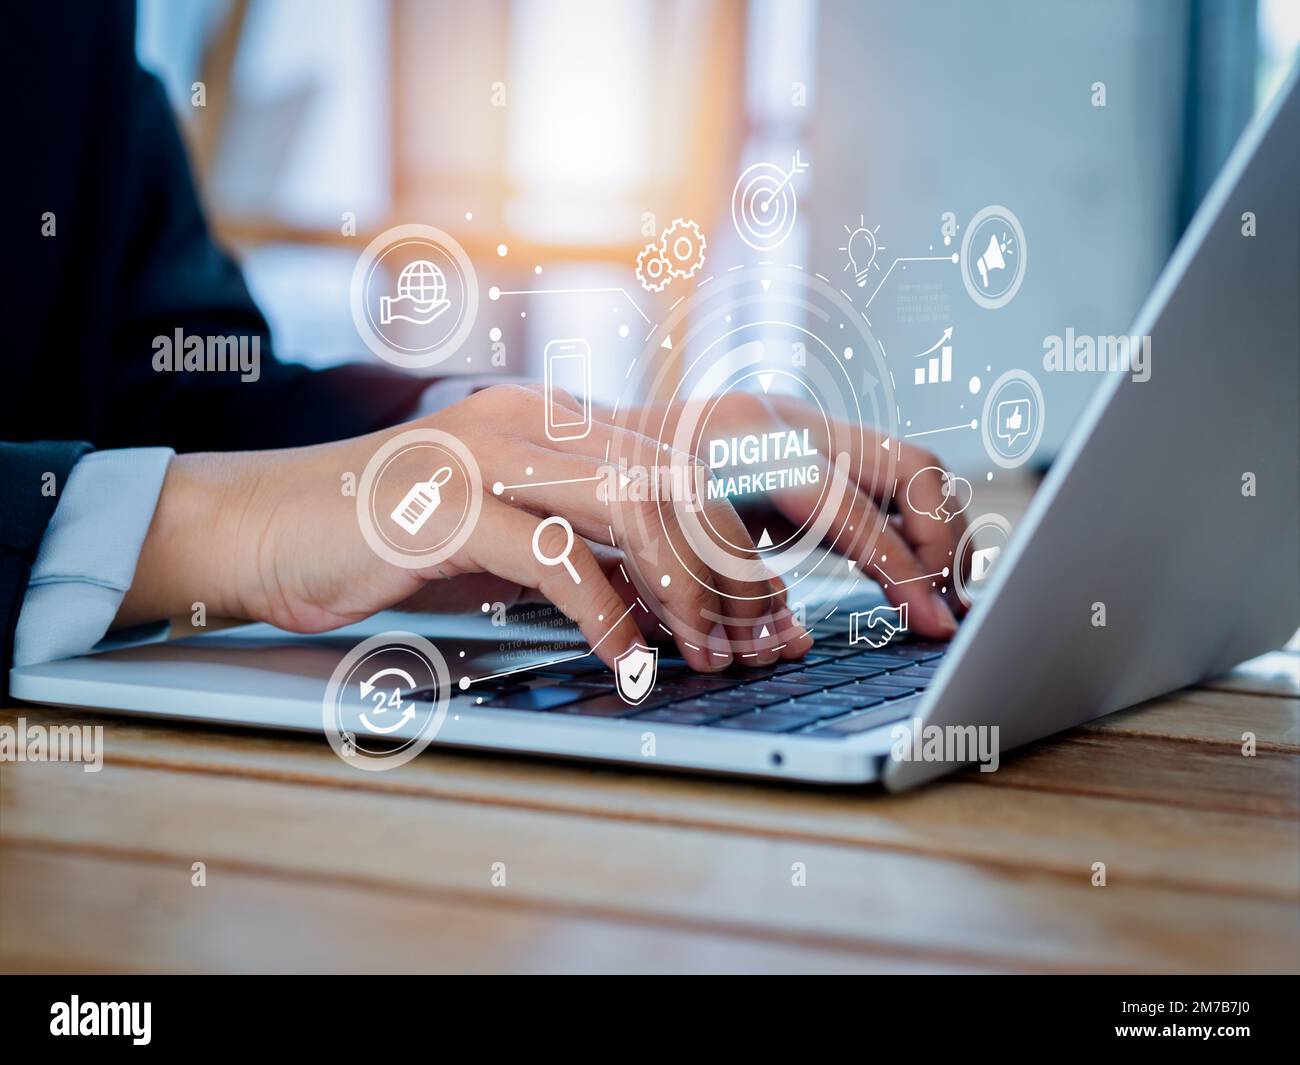 Digital marketing and social media concept. Words with strategy icons appear while people using laptop. Business data solution, seo, content, advertis Stock Photo